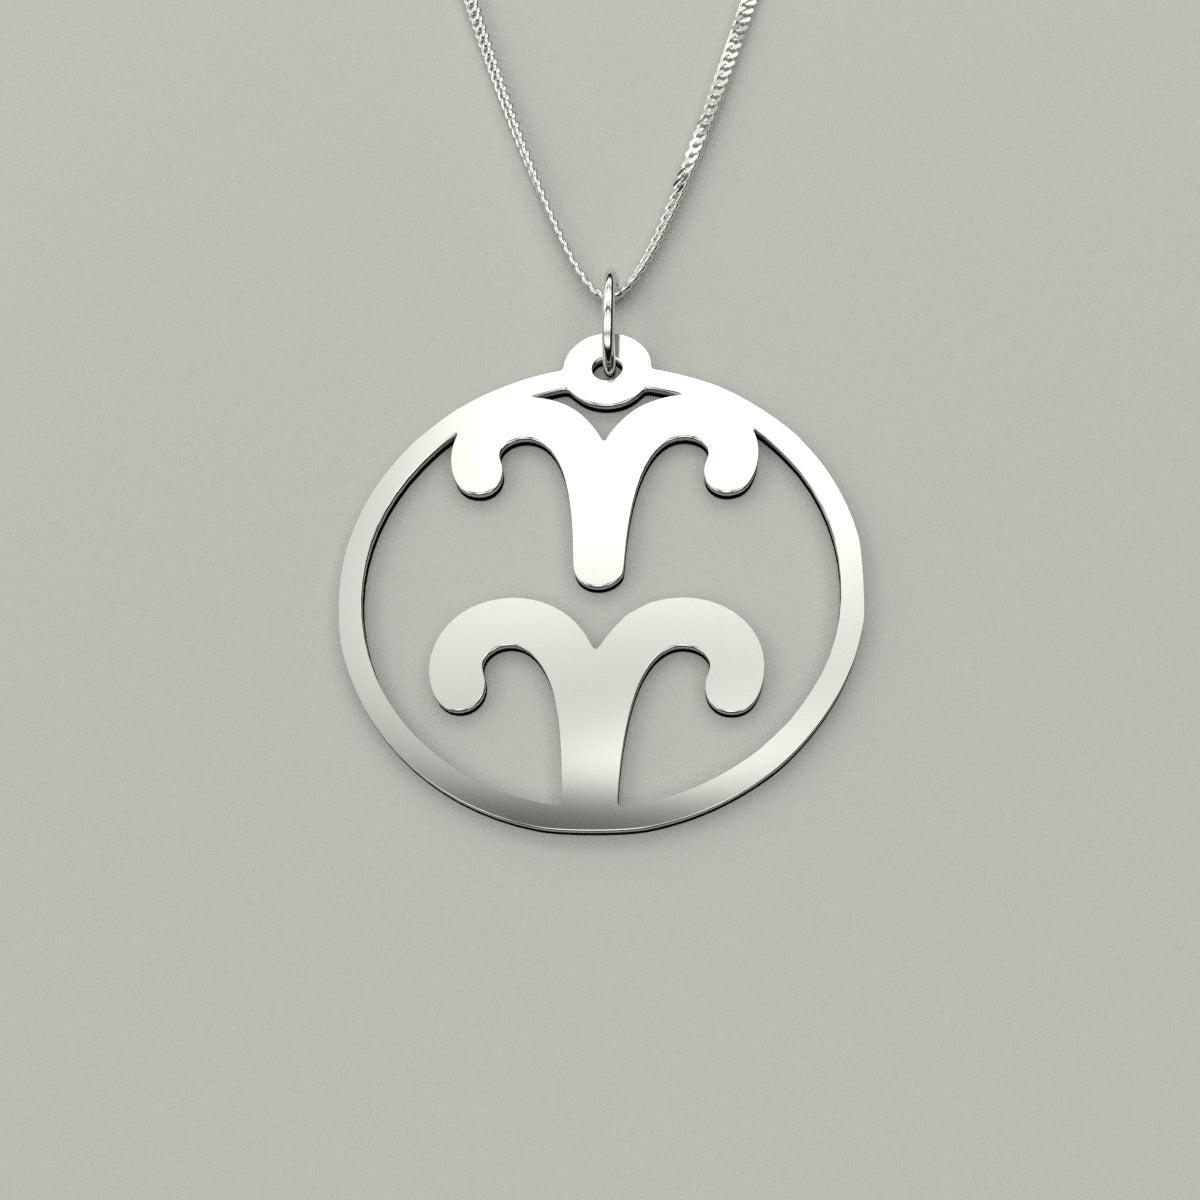 Aries & Aries - Couple Necklace